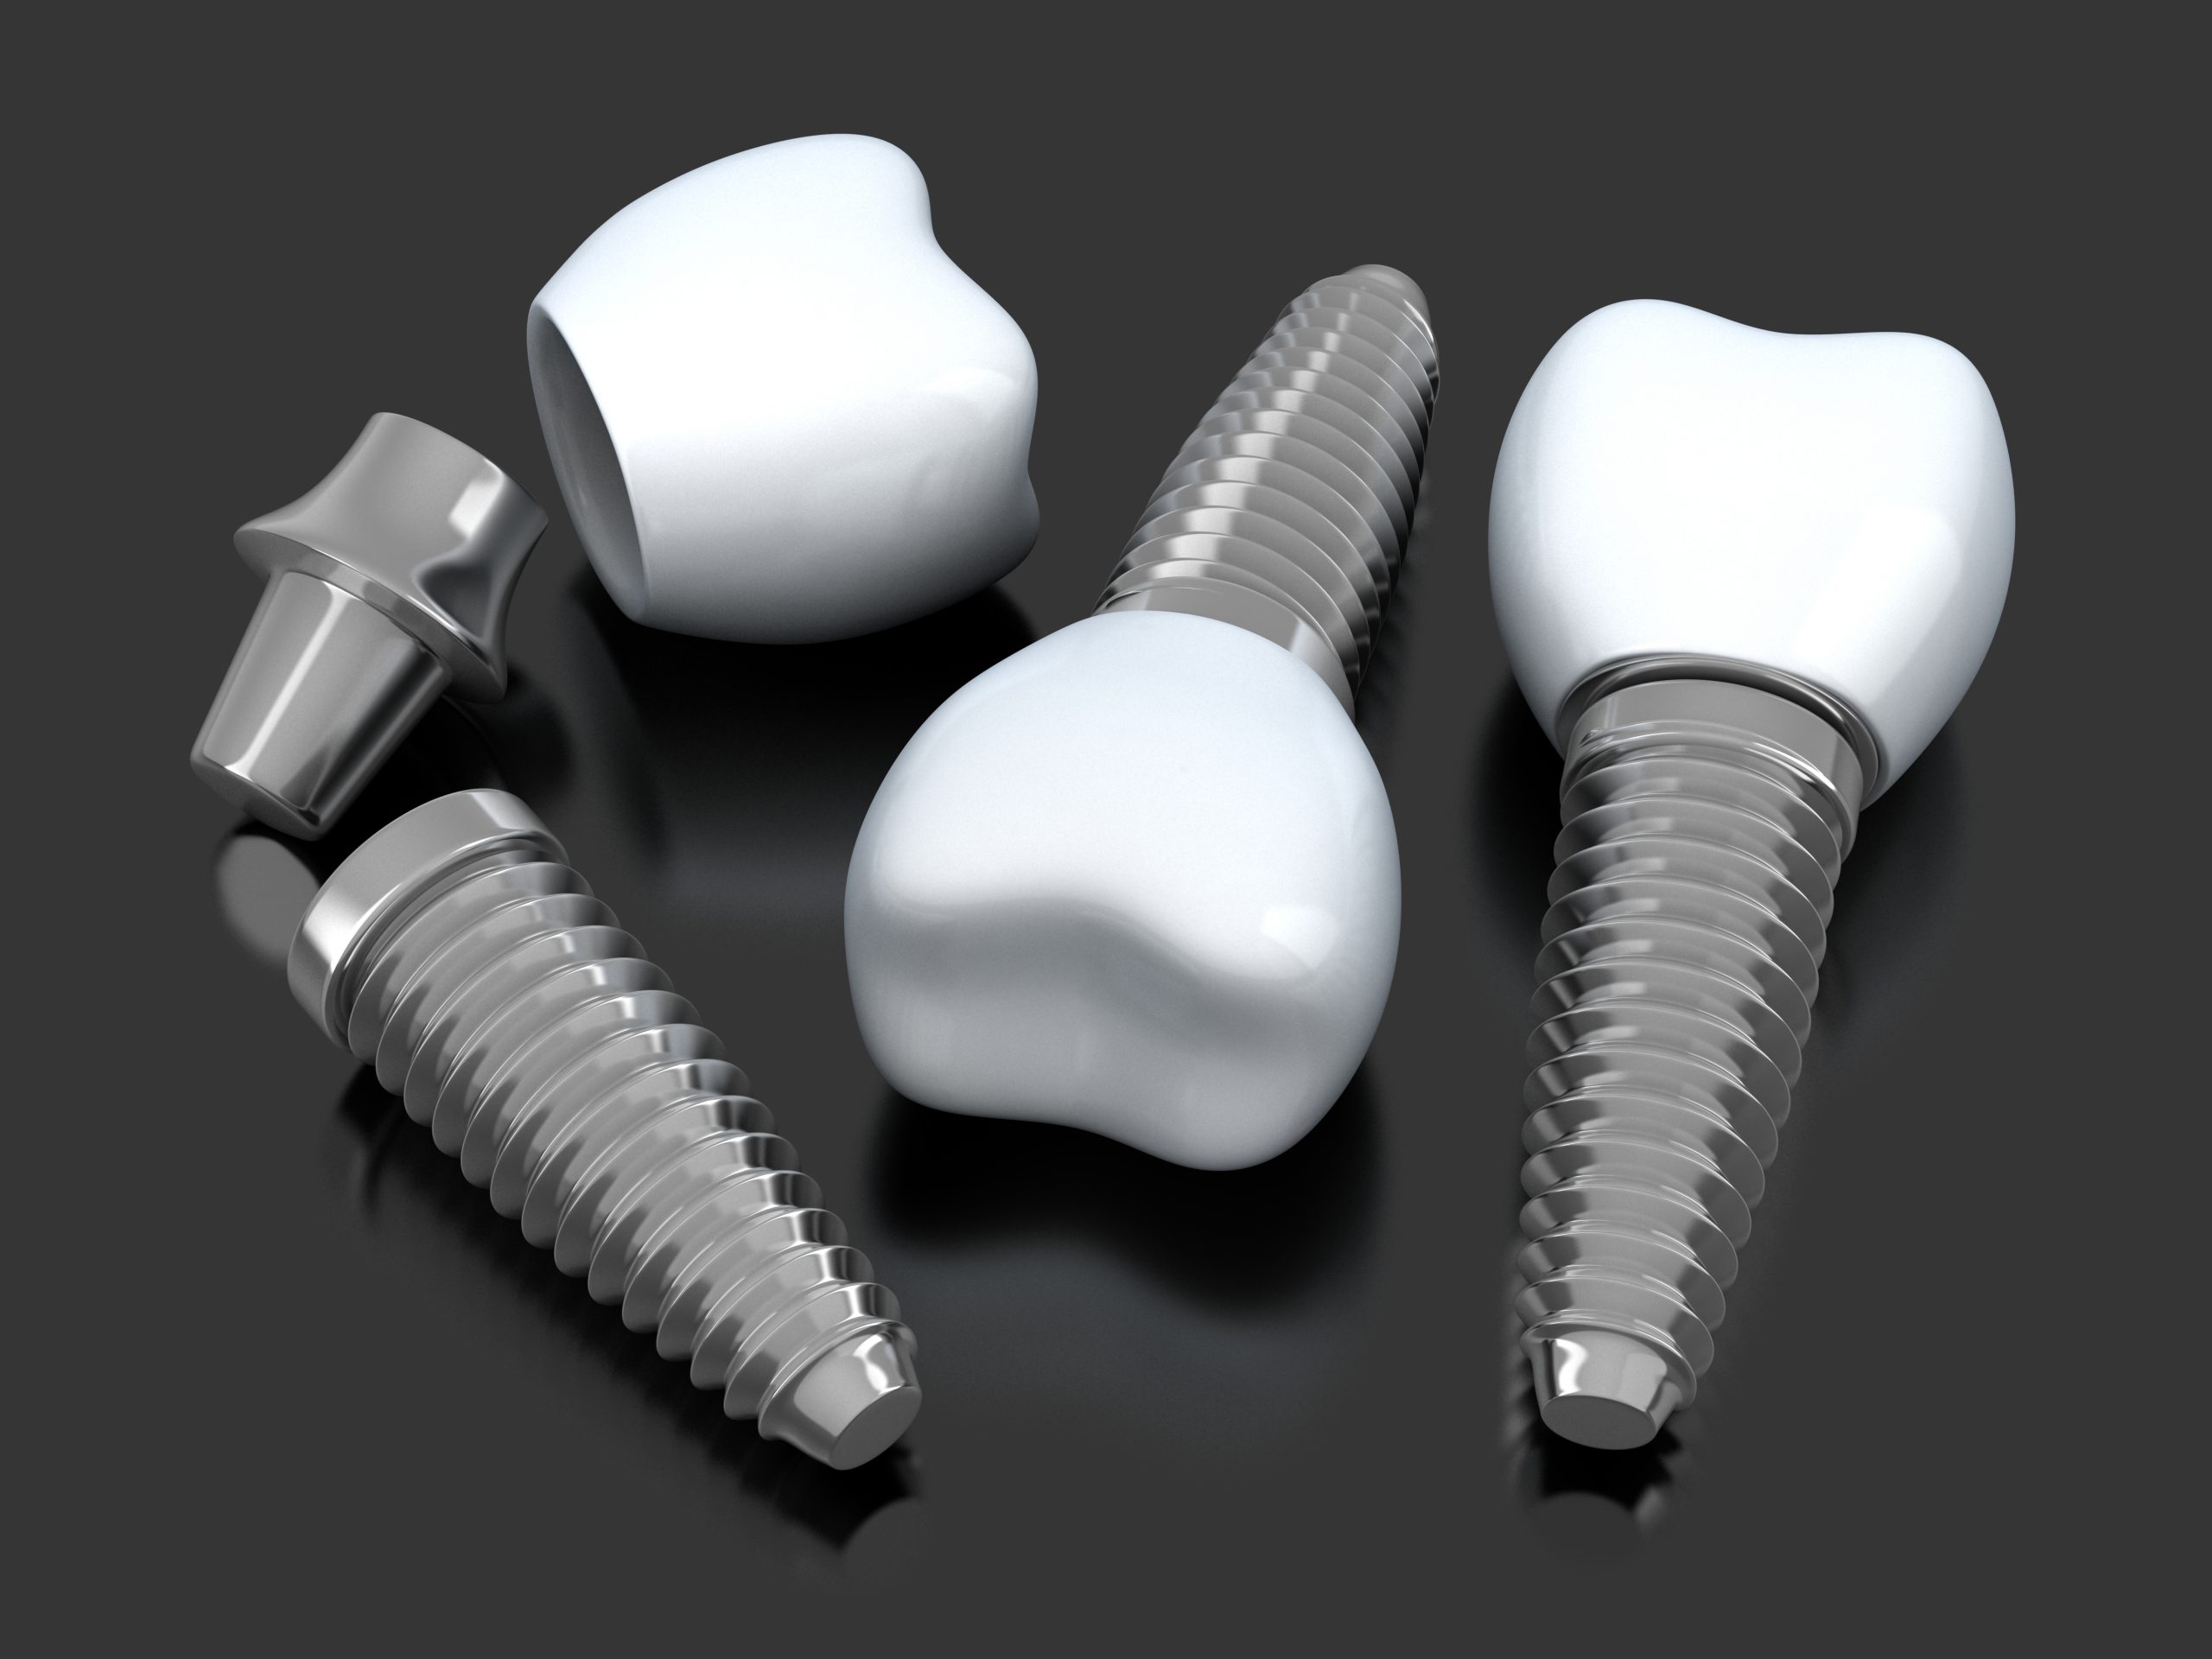 Dental Implants Brands and Dental Implant Companies: Which ones are the most Indicated